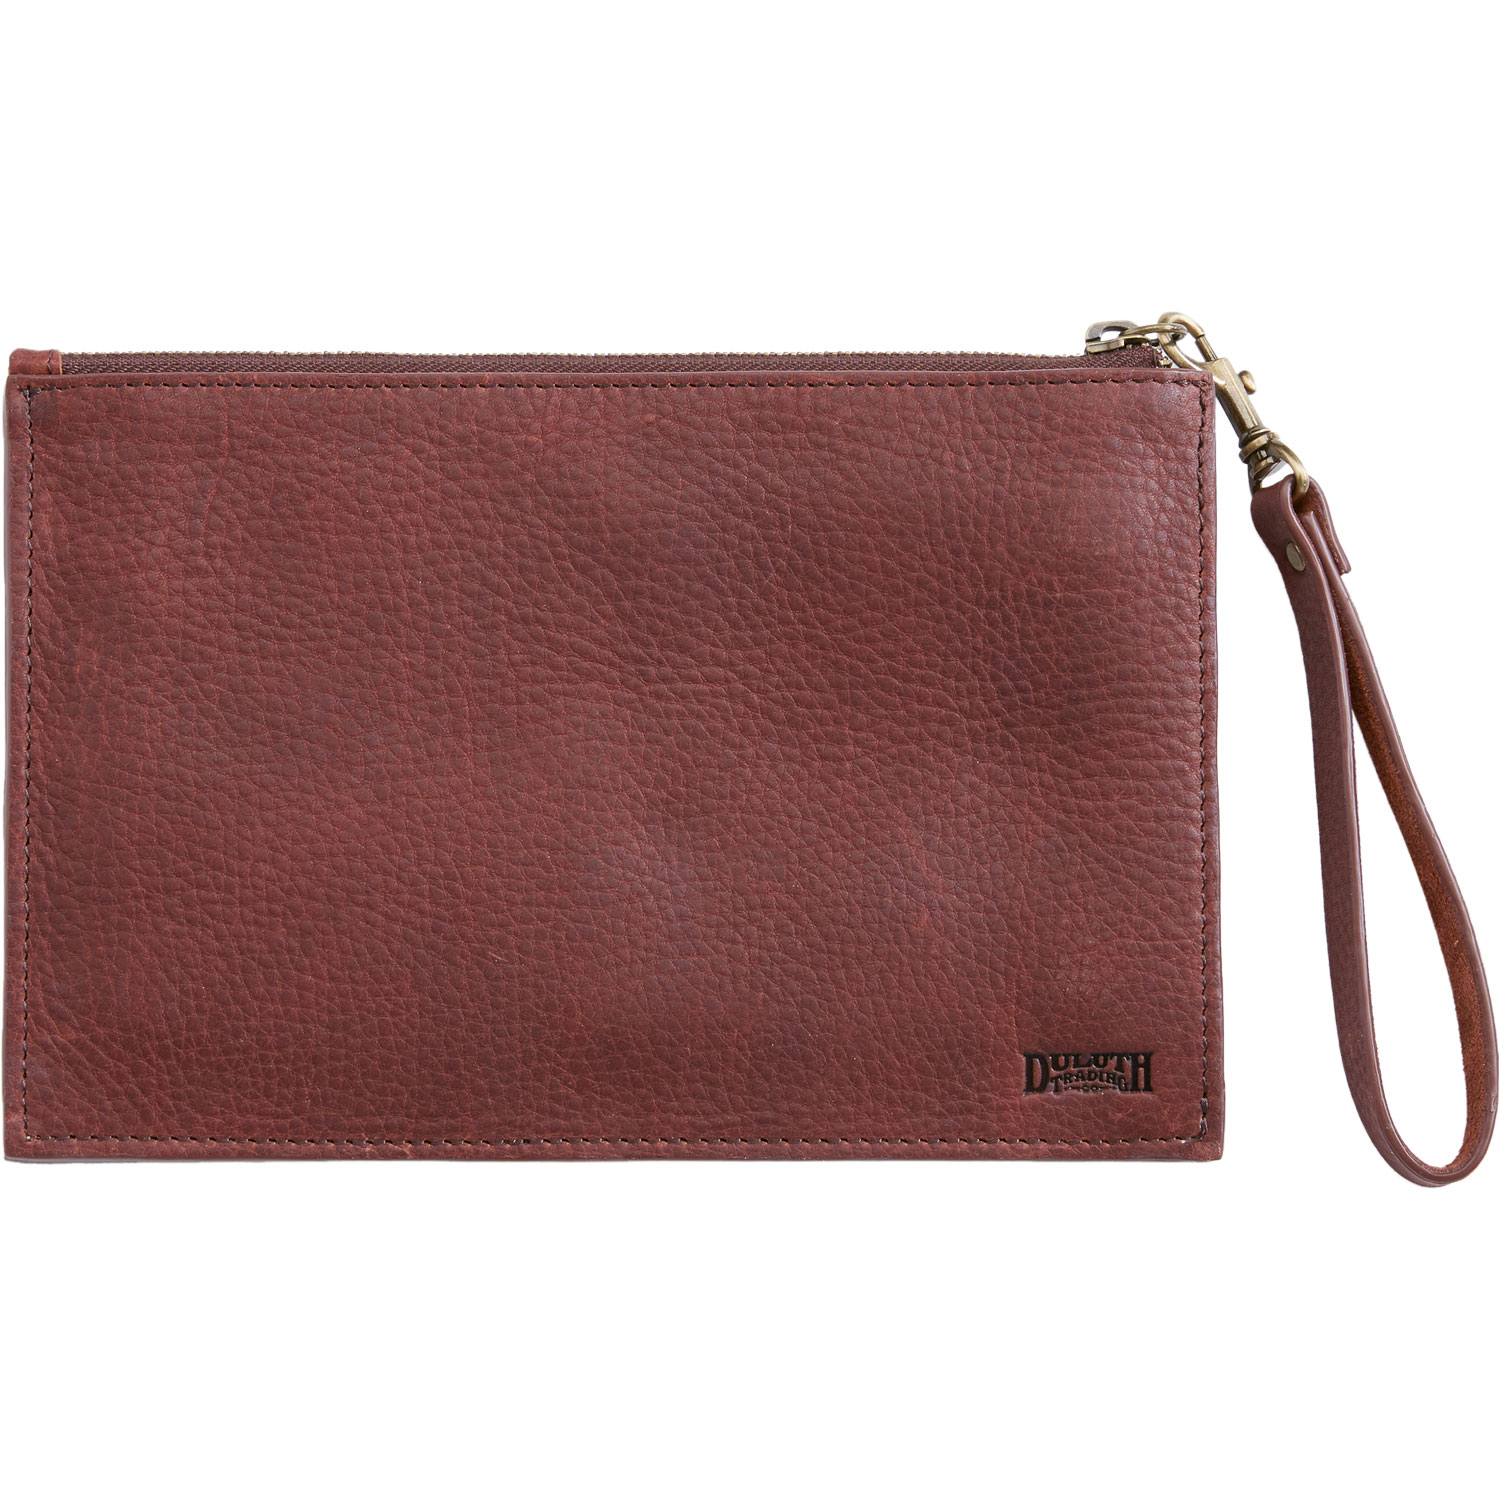 LARGE ZIPPED LEATHER POUCH